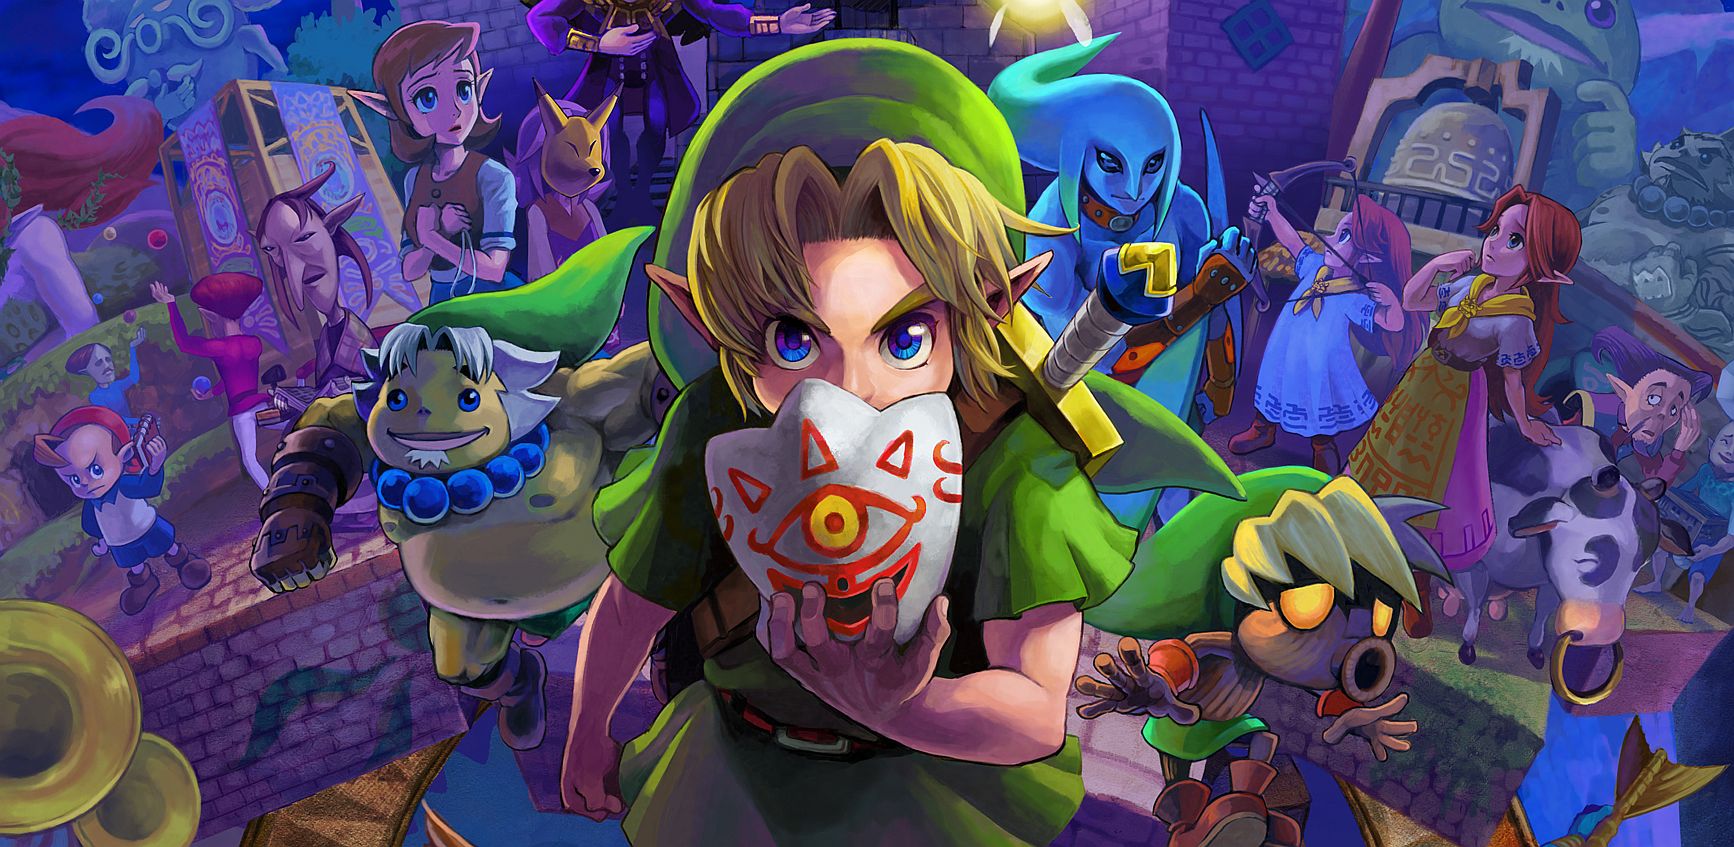 Image for Check out Africa by Toto being played on instruments in Majora's Mask